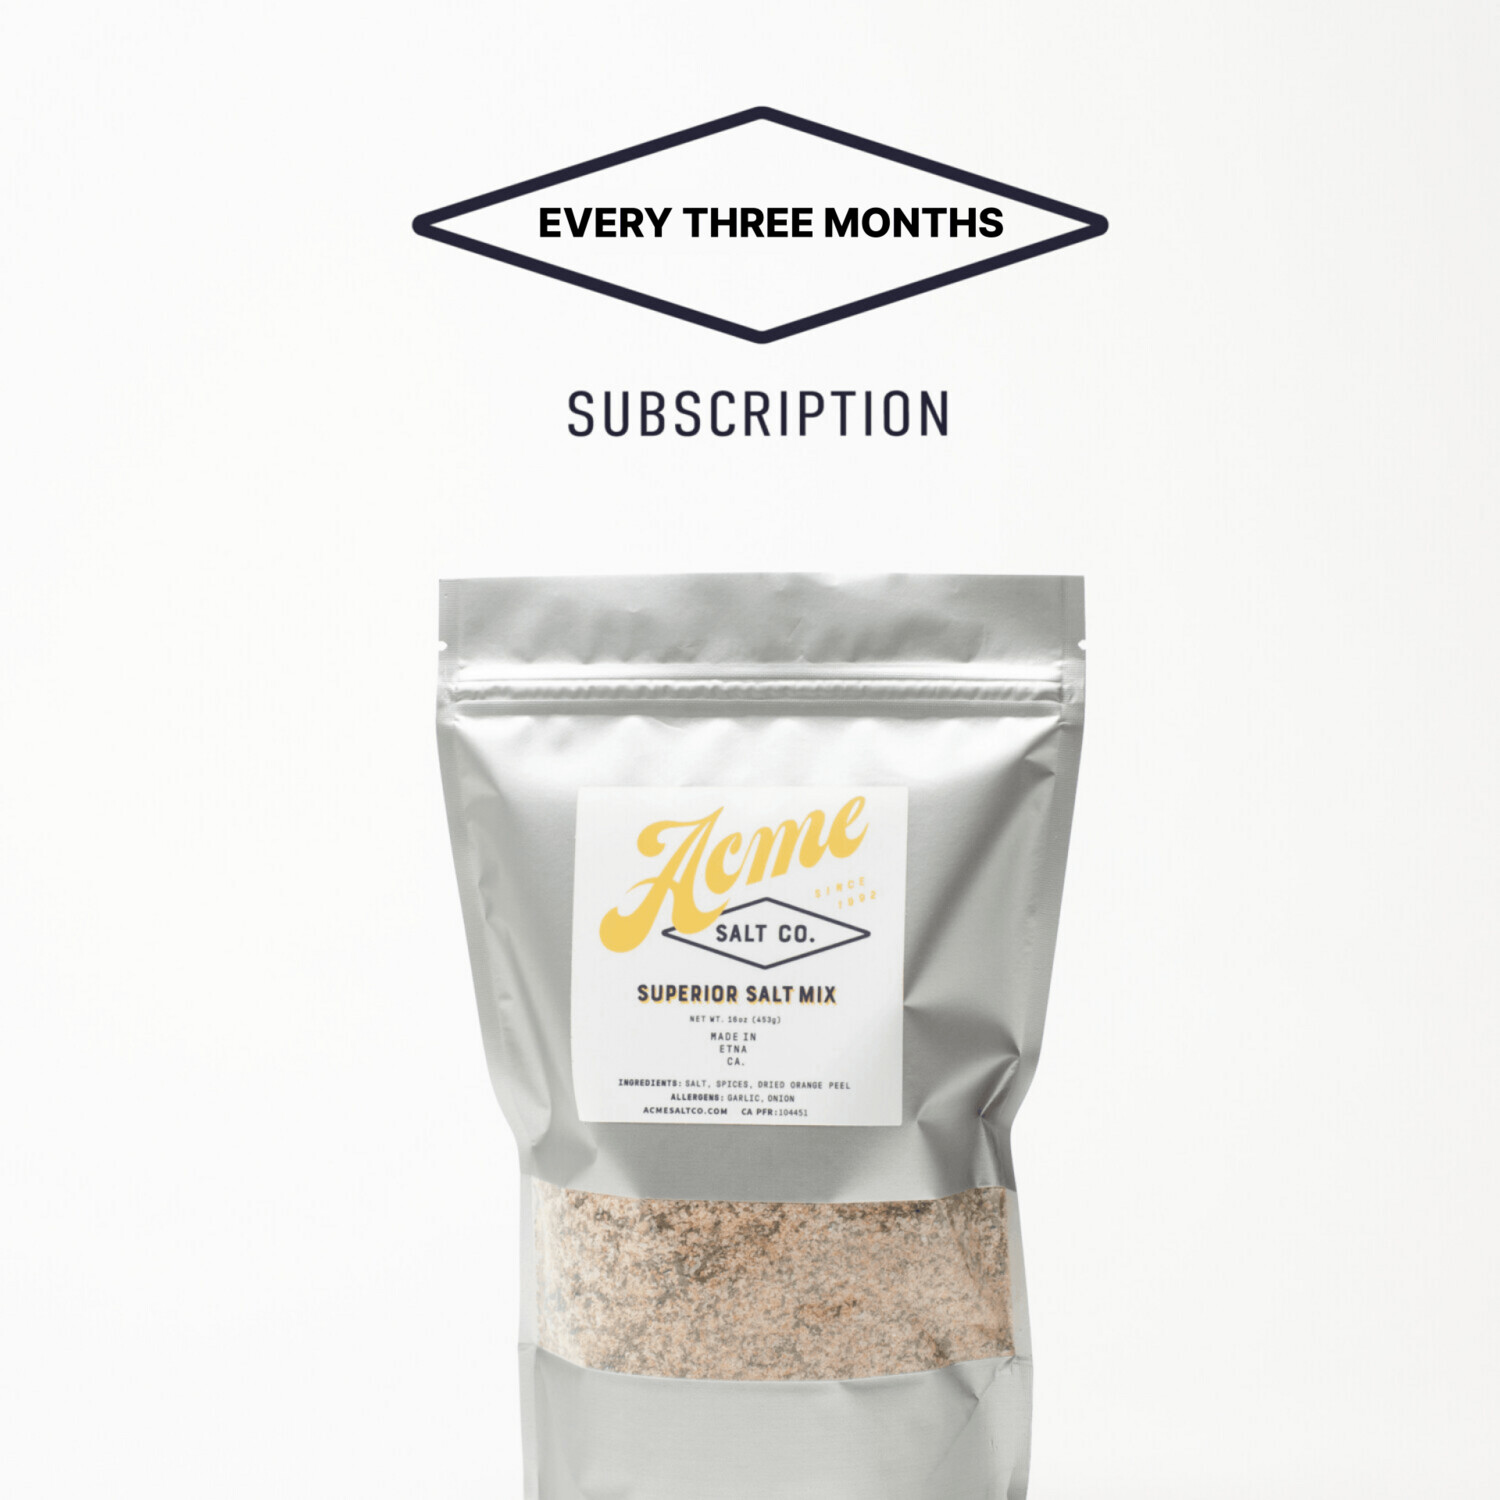 Superior Salt Mix Subscription - Once Every 3 Months